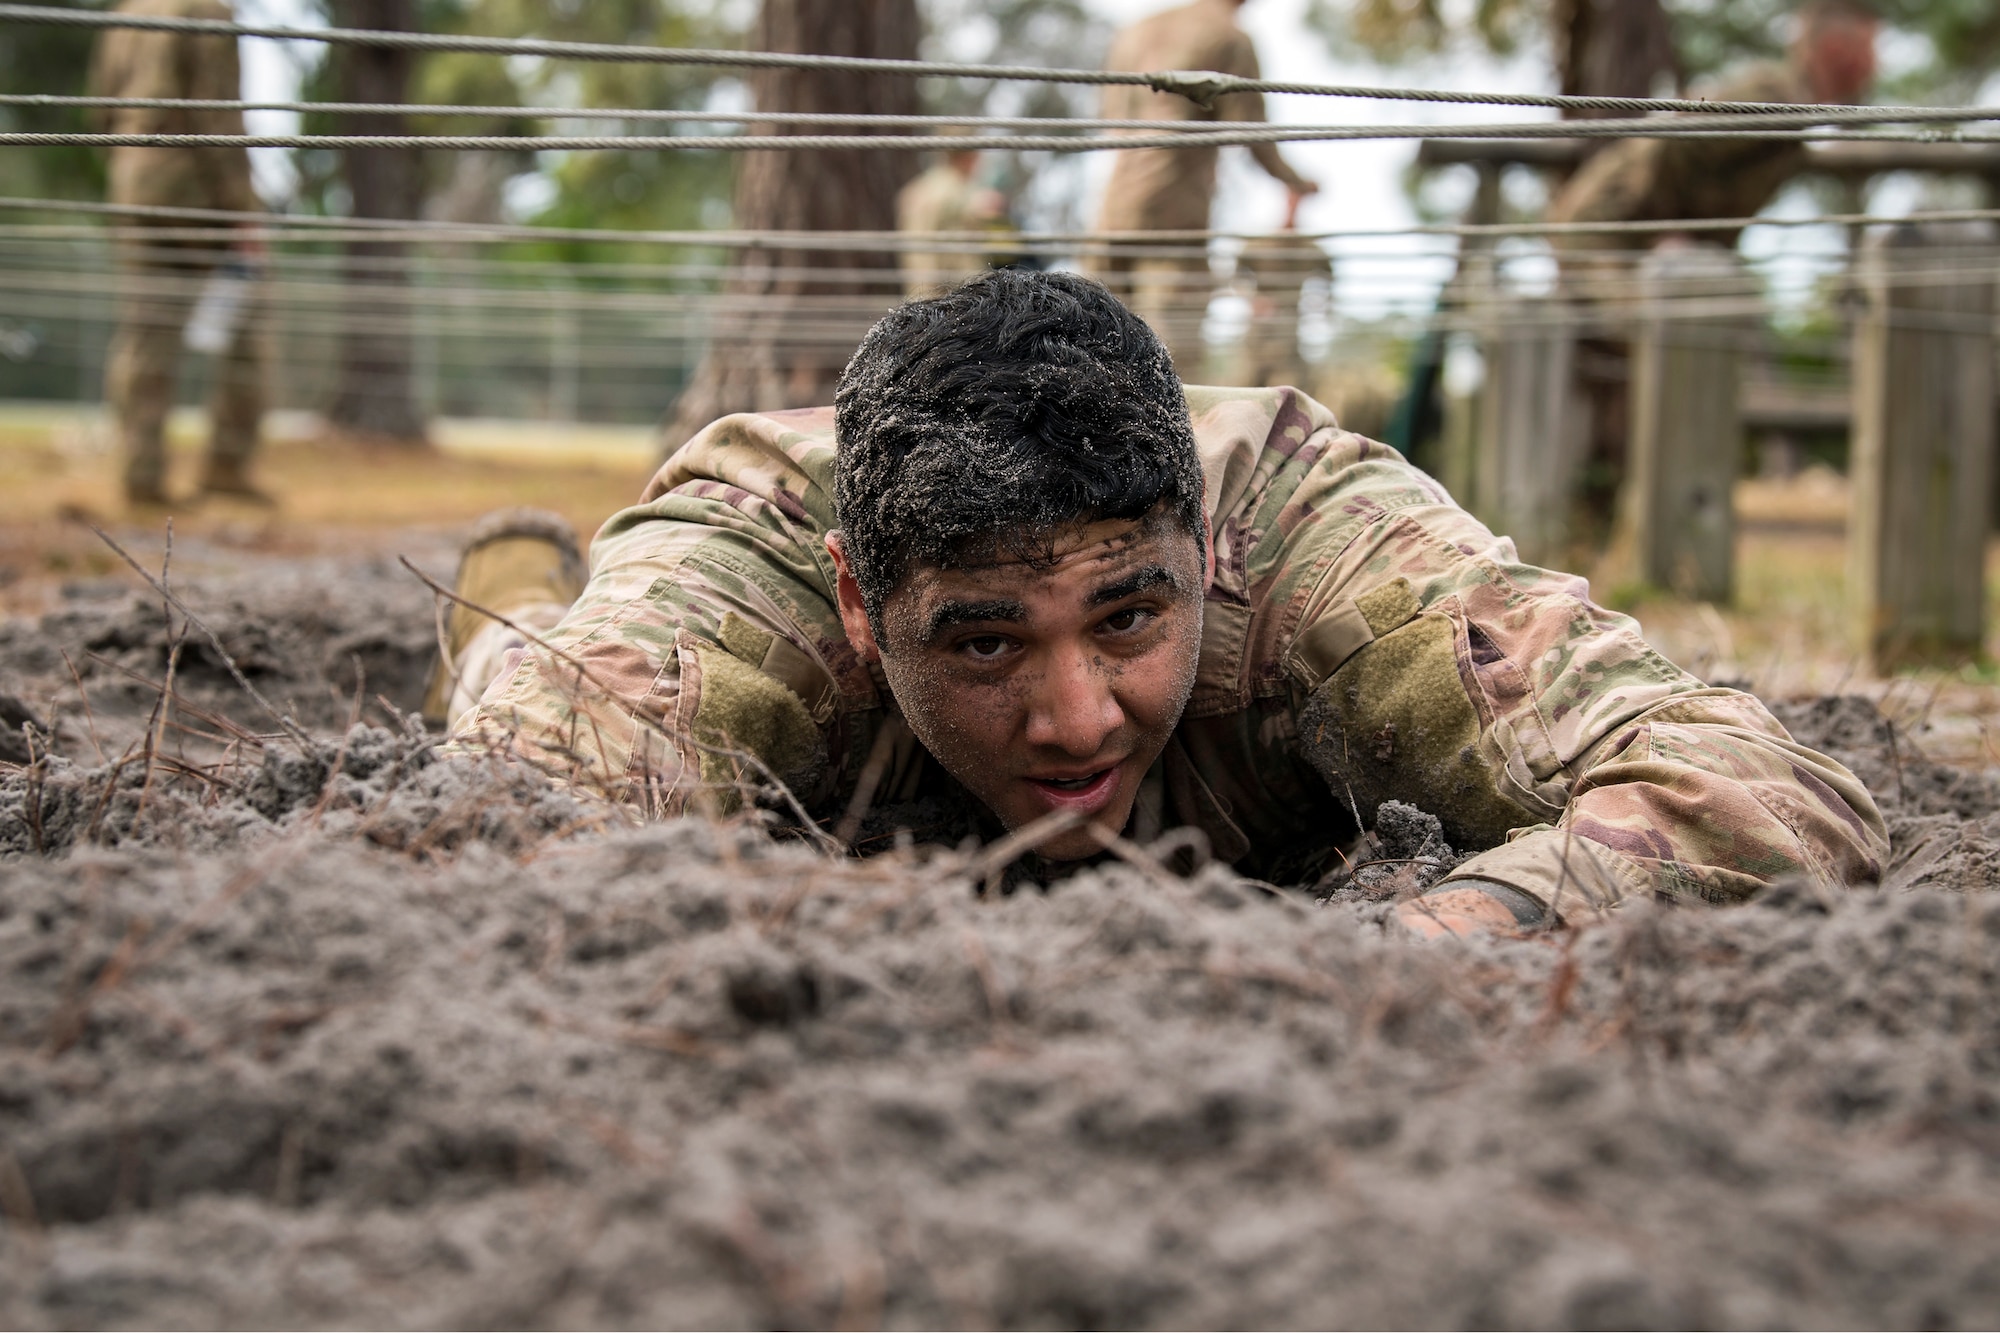 Airman First Class Jaime Serna, 822d Base Defense Squadron fireteam member, low crawls through an obstacle during an Army Air Assault Assessment (AAA), Jan. 30, 2019, at Camp Blanding, Fla. The AAA is designed to determine Airmen’s physical and mental readiness before being selected to attend Army Air Assault school. (U.S. Air Force photo by Airman First Class Eugene Oliver)